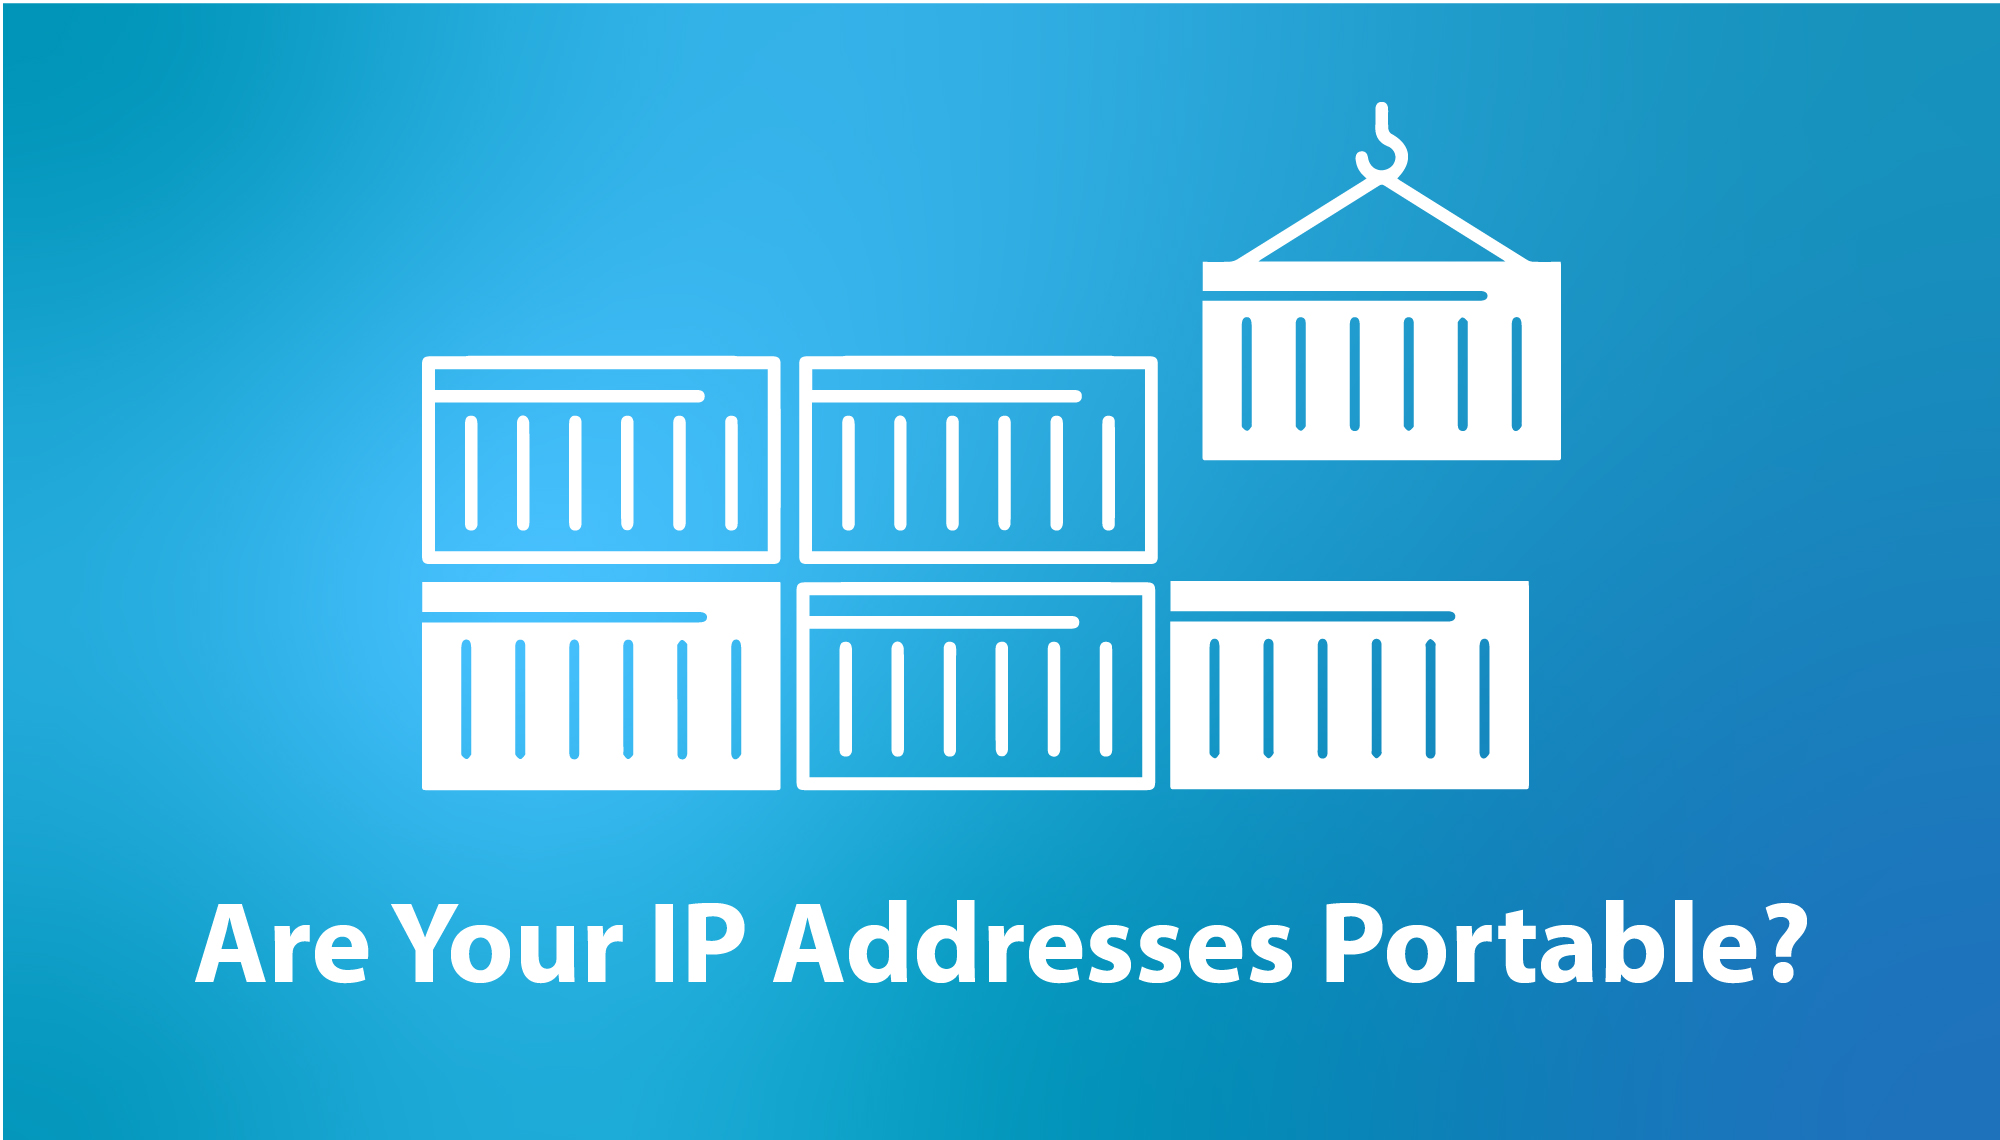 Are Your IP Addresses Portable?